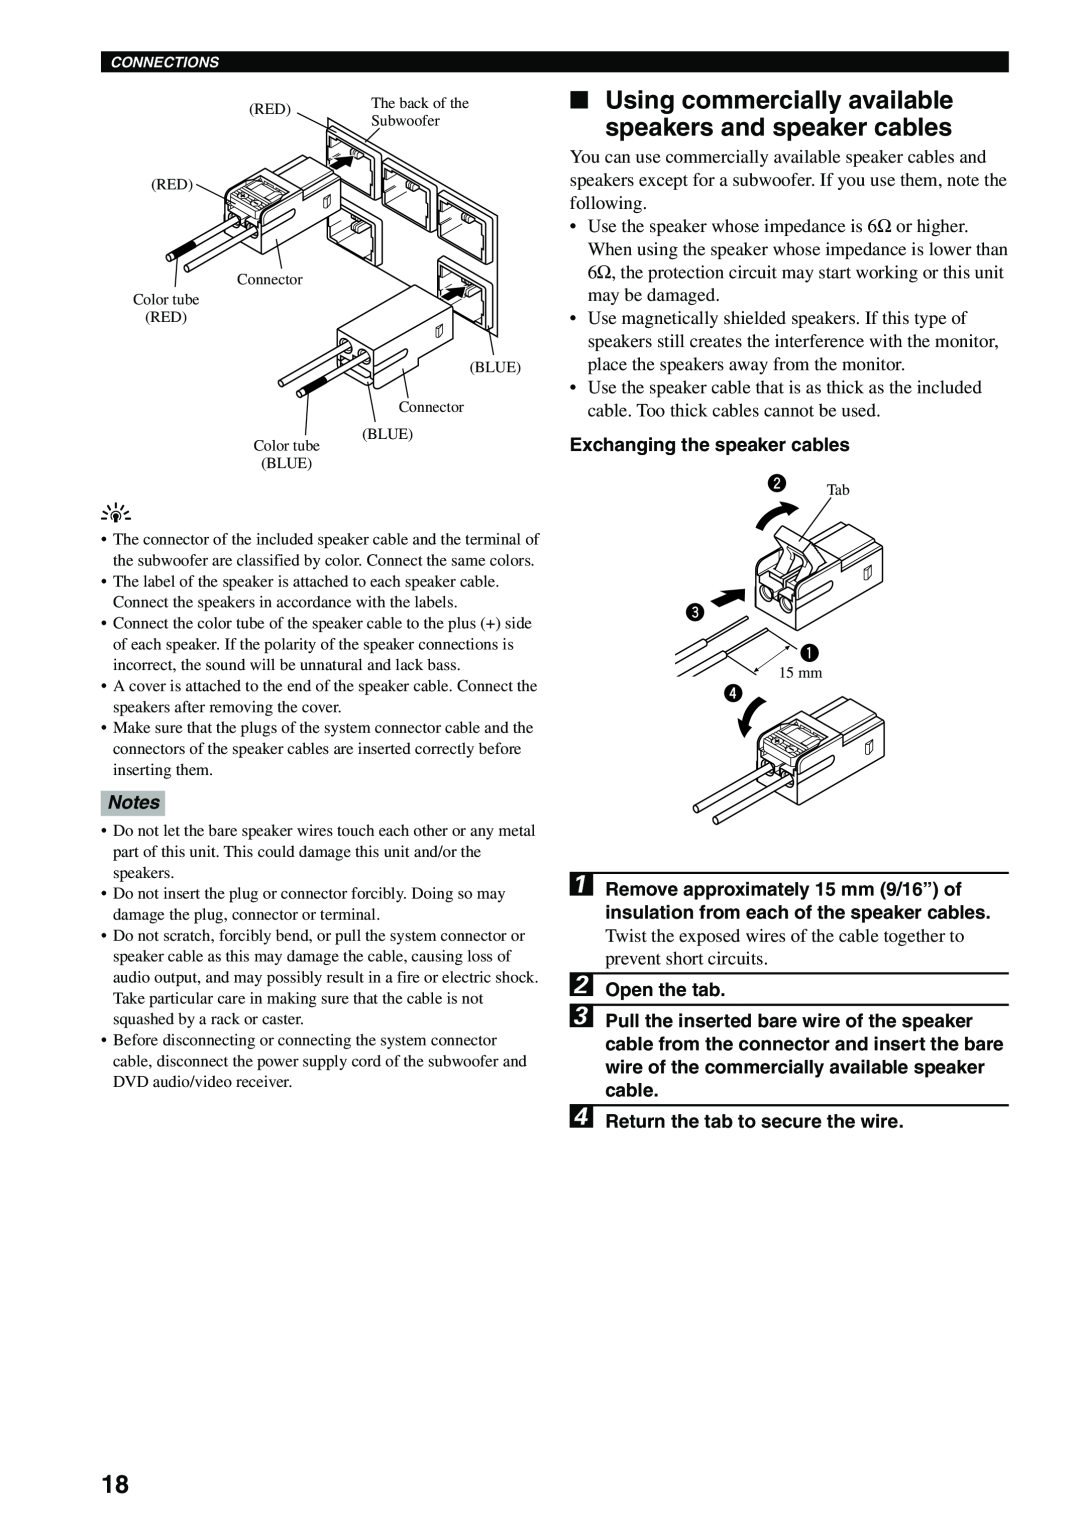 Yamaha DVX-S100 owner manual Exchanging the speaker cables, 2Open the tab, 4Return the tab to secure the wire 